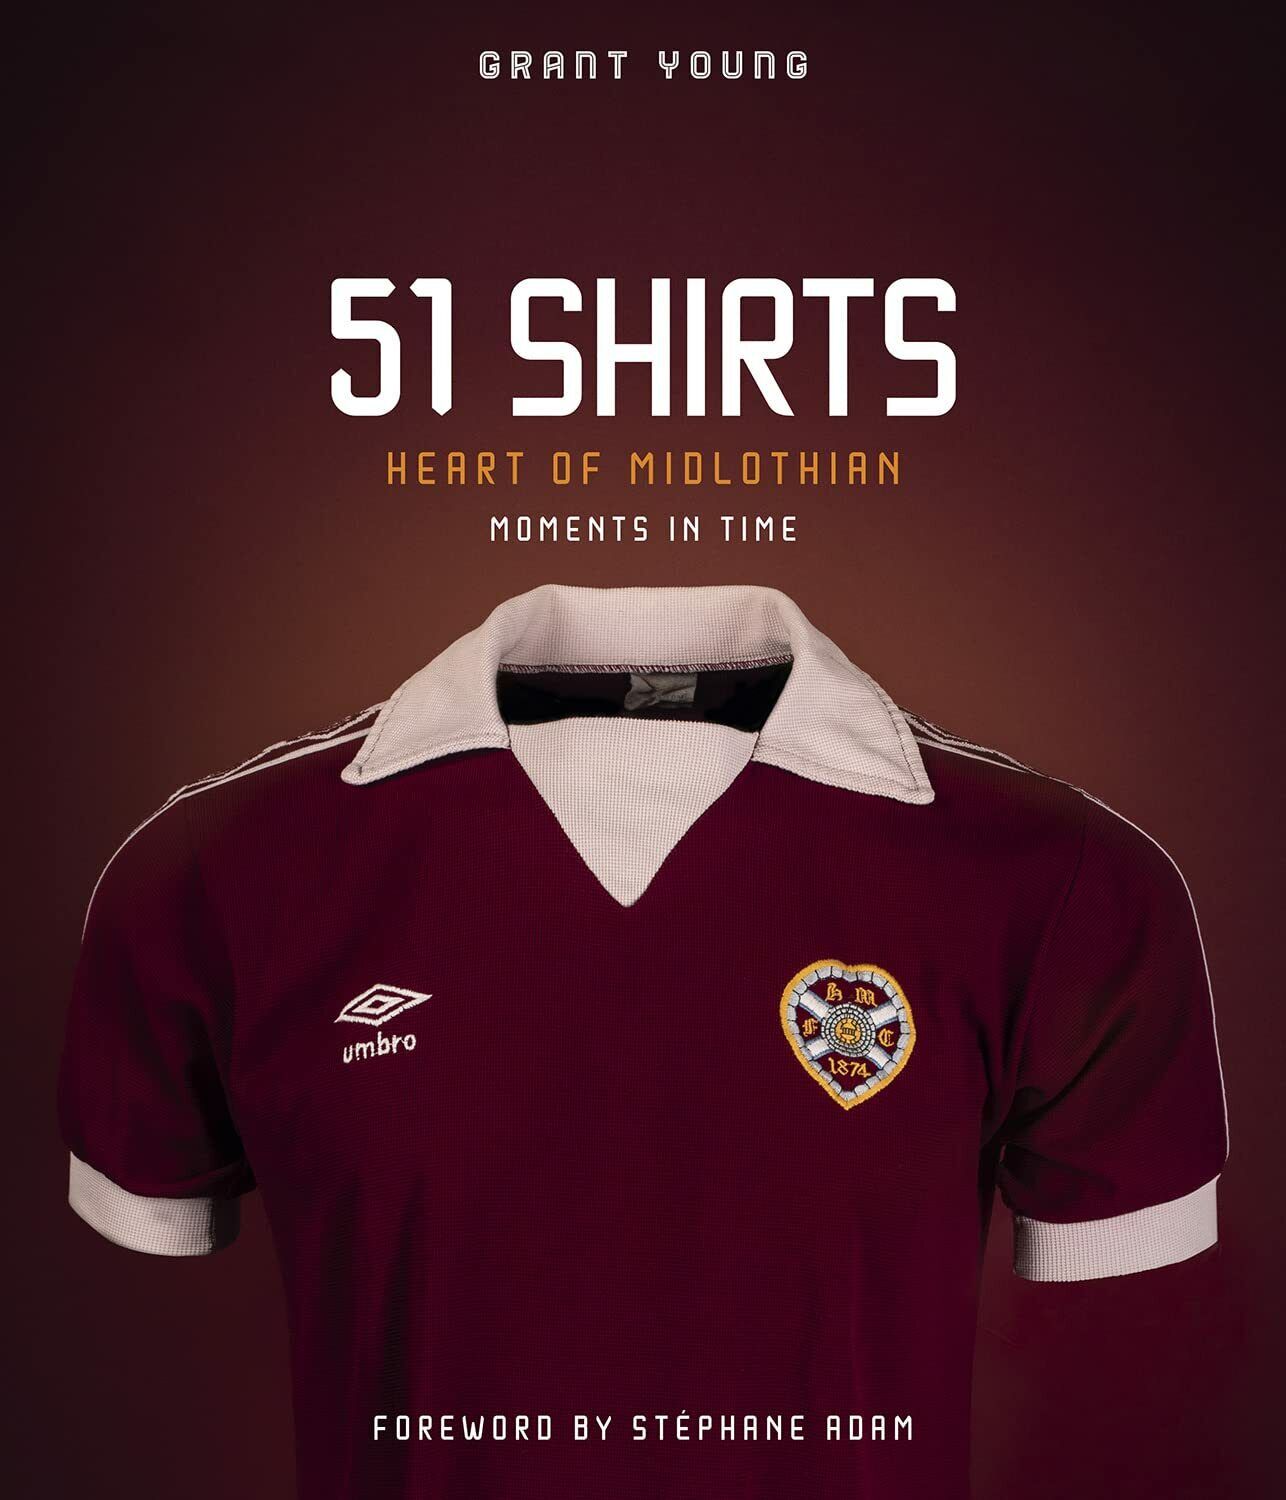 Heart of Midlothian, 51 Shirts: Moments in Time - GRANT YOUNG - 2022